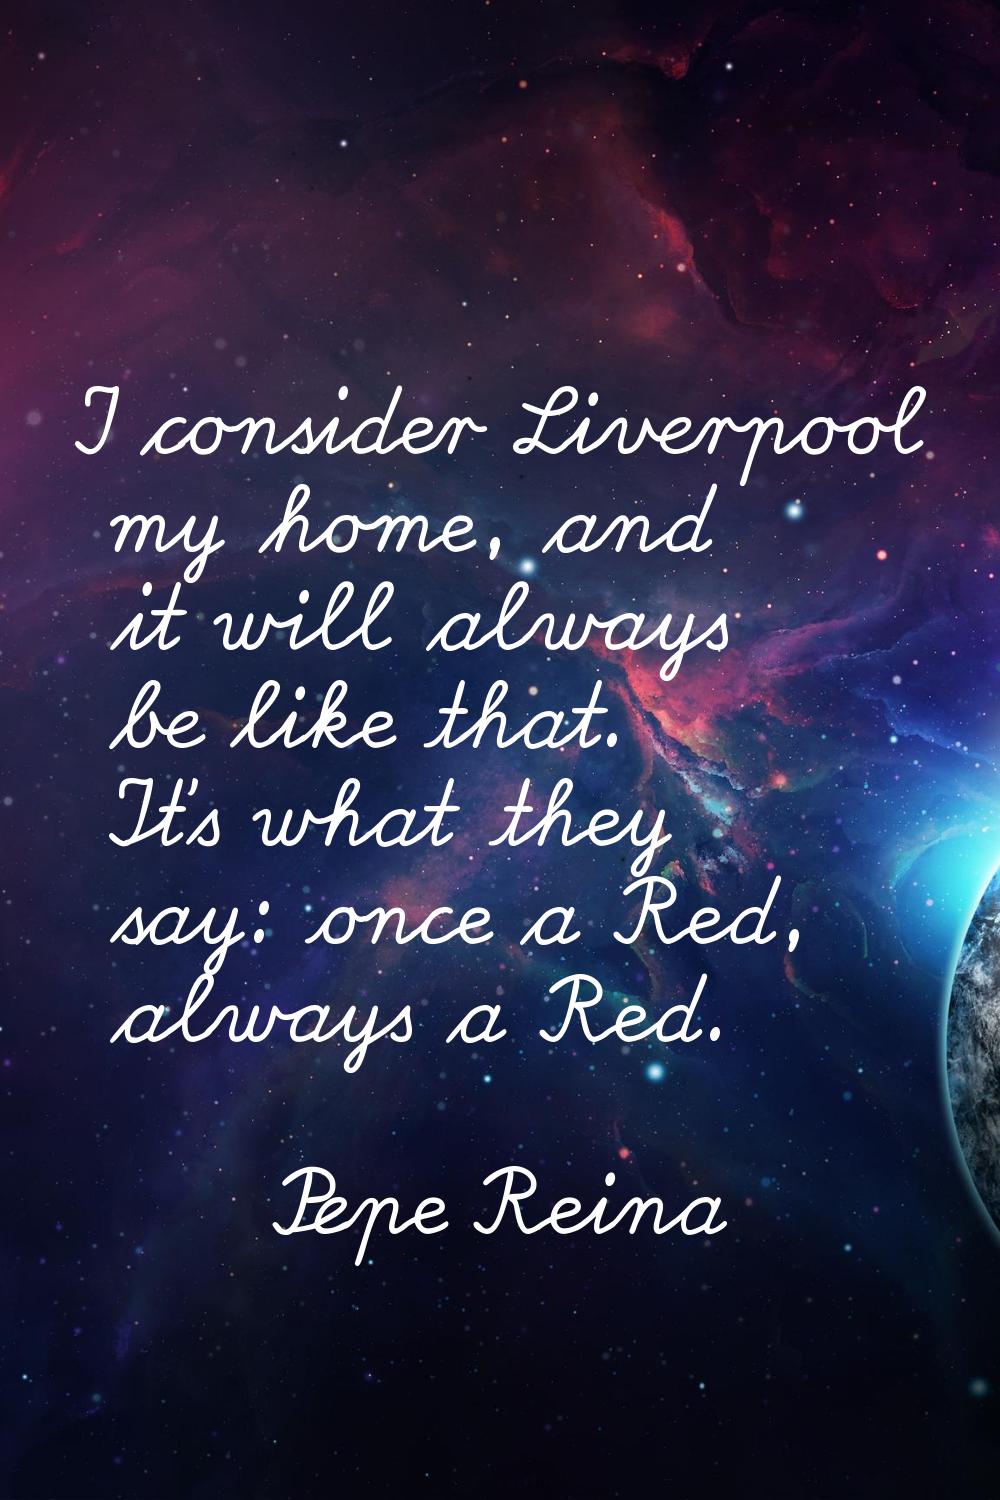 I consider Liverpool my home, and it will always be like that. It's what they say: once a Red, alwa